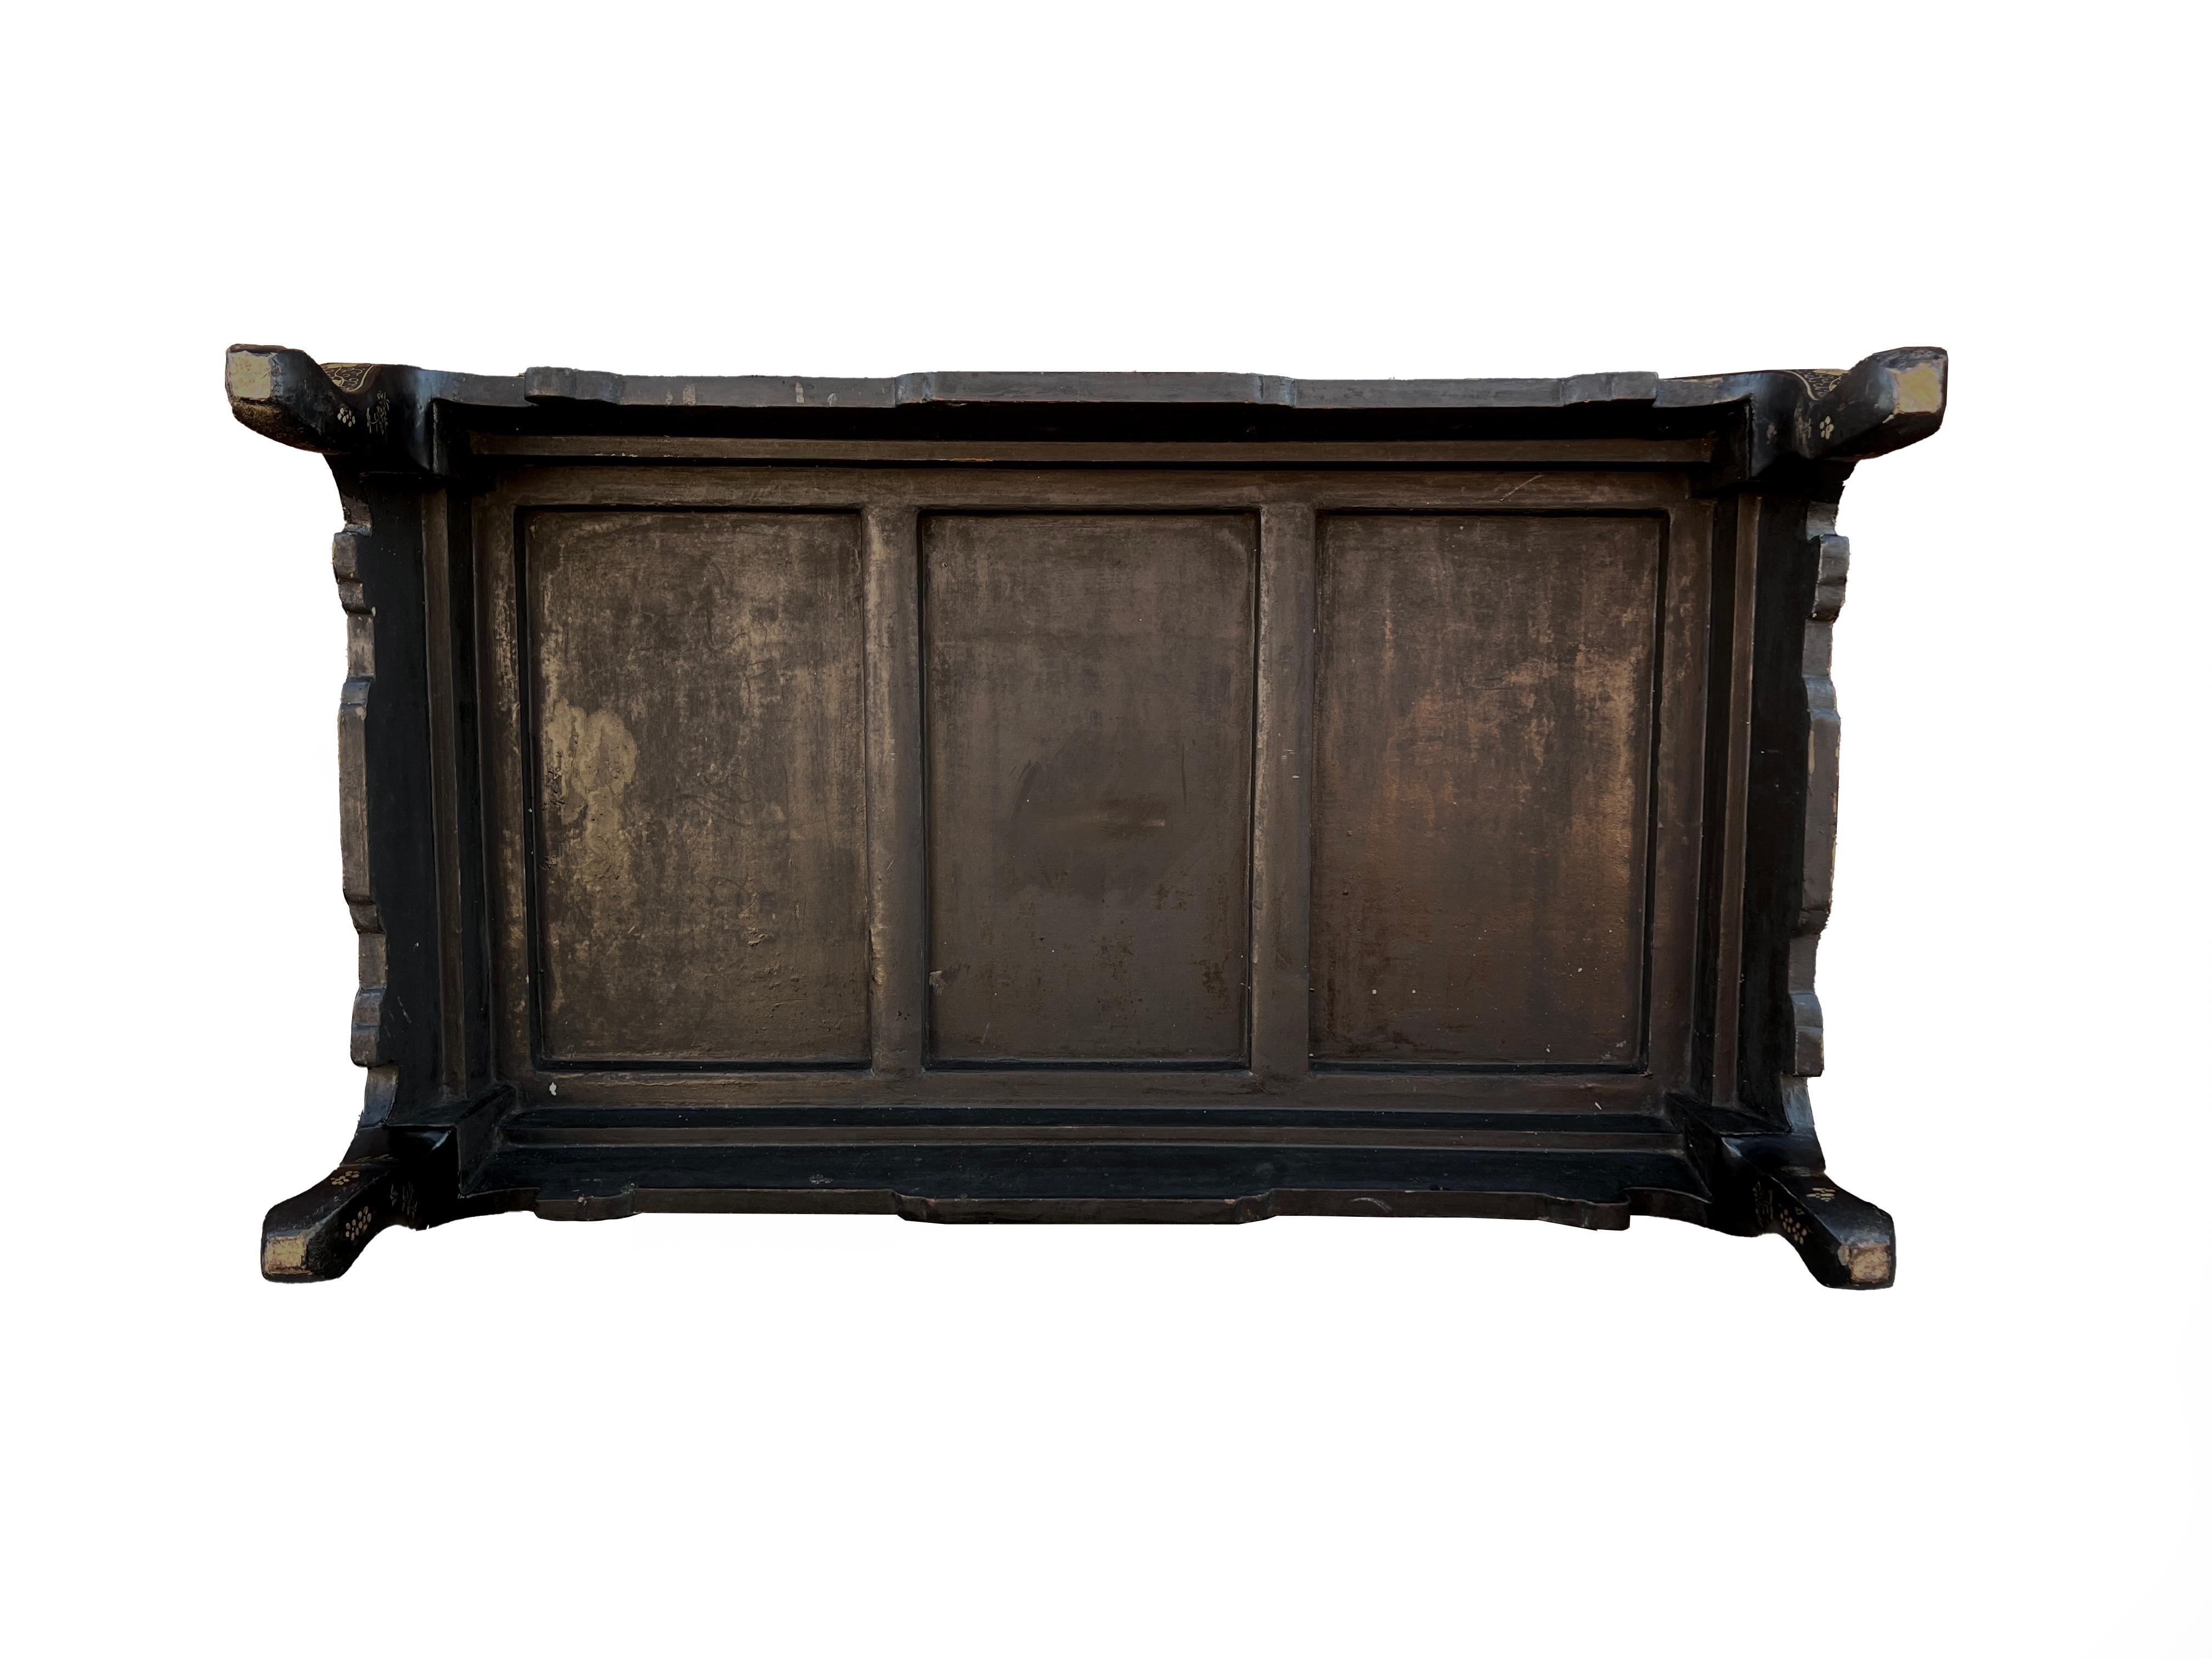 19th Century Black Lacquer and Gilt Low Table with Cabriole Legs In Good Condition For Sale In Brooklyn, NY